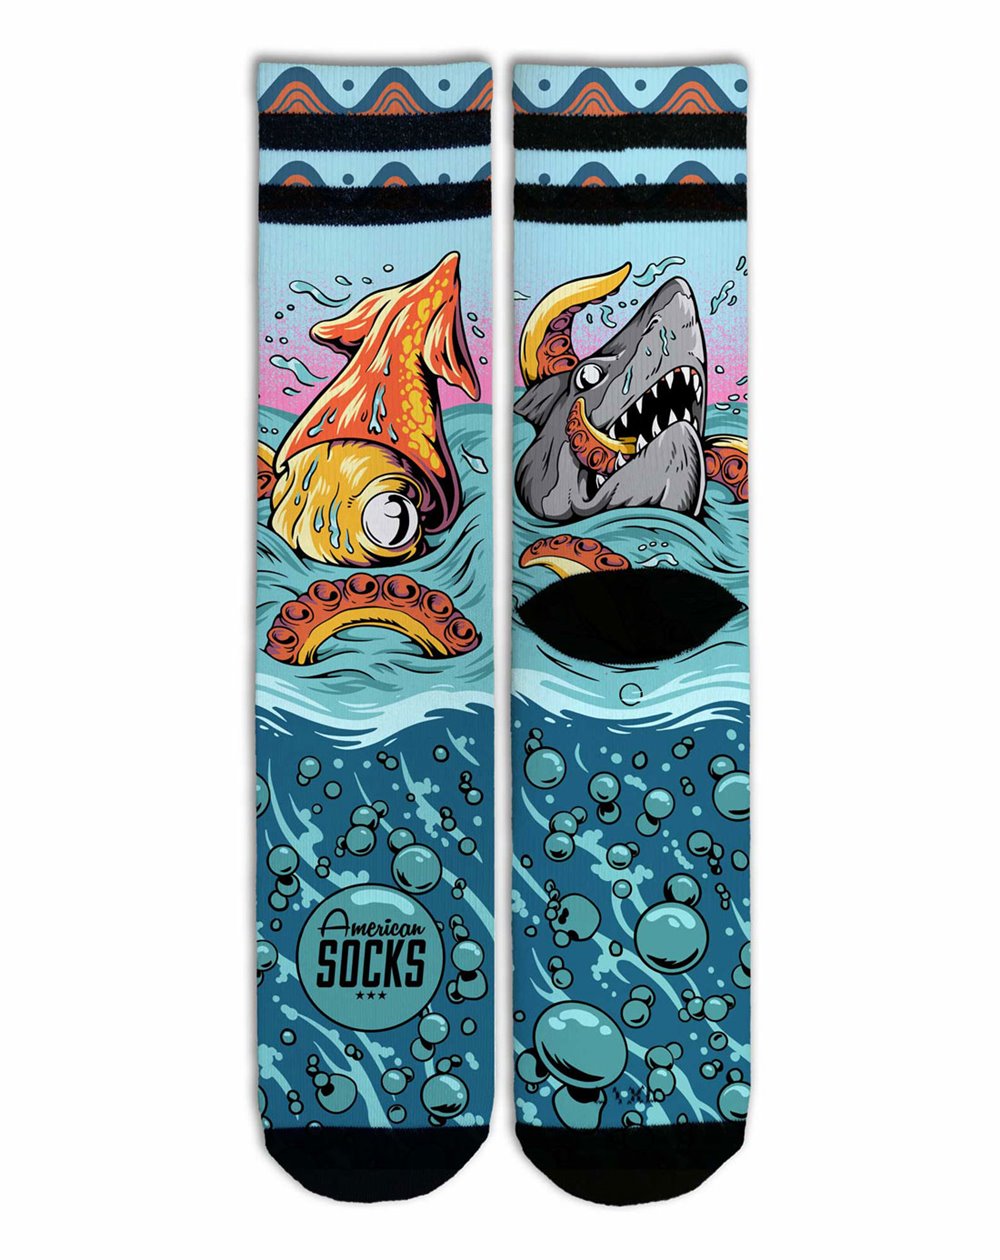 American Socks Chaussettes Skate Seamonsters Mixte Adulte